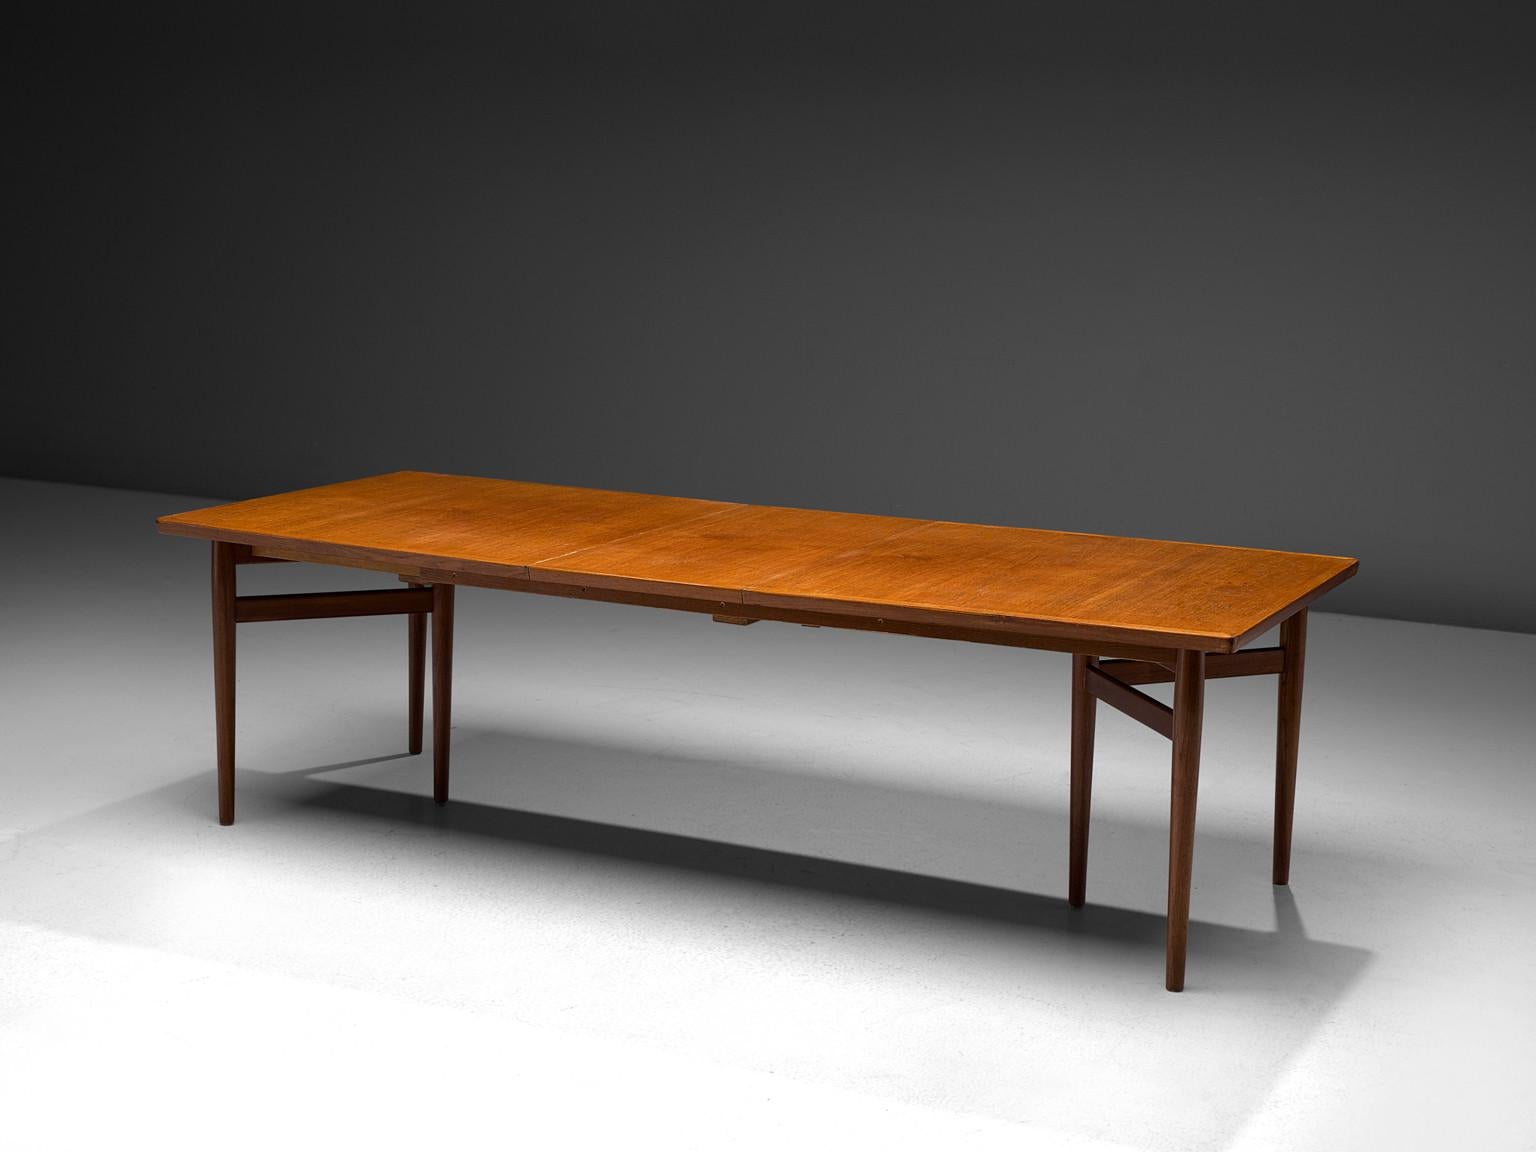 Arne Vodder for Sibast, dining table model 201, teak, Denmark, 1960s.

This rectangular dining table was designed by Danish designer Arne Vodder and manufactured in the 1960s by Sibast. Under both short ends of the top, Vodder placed three